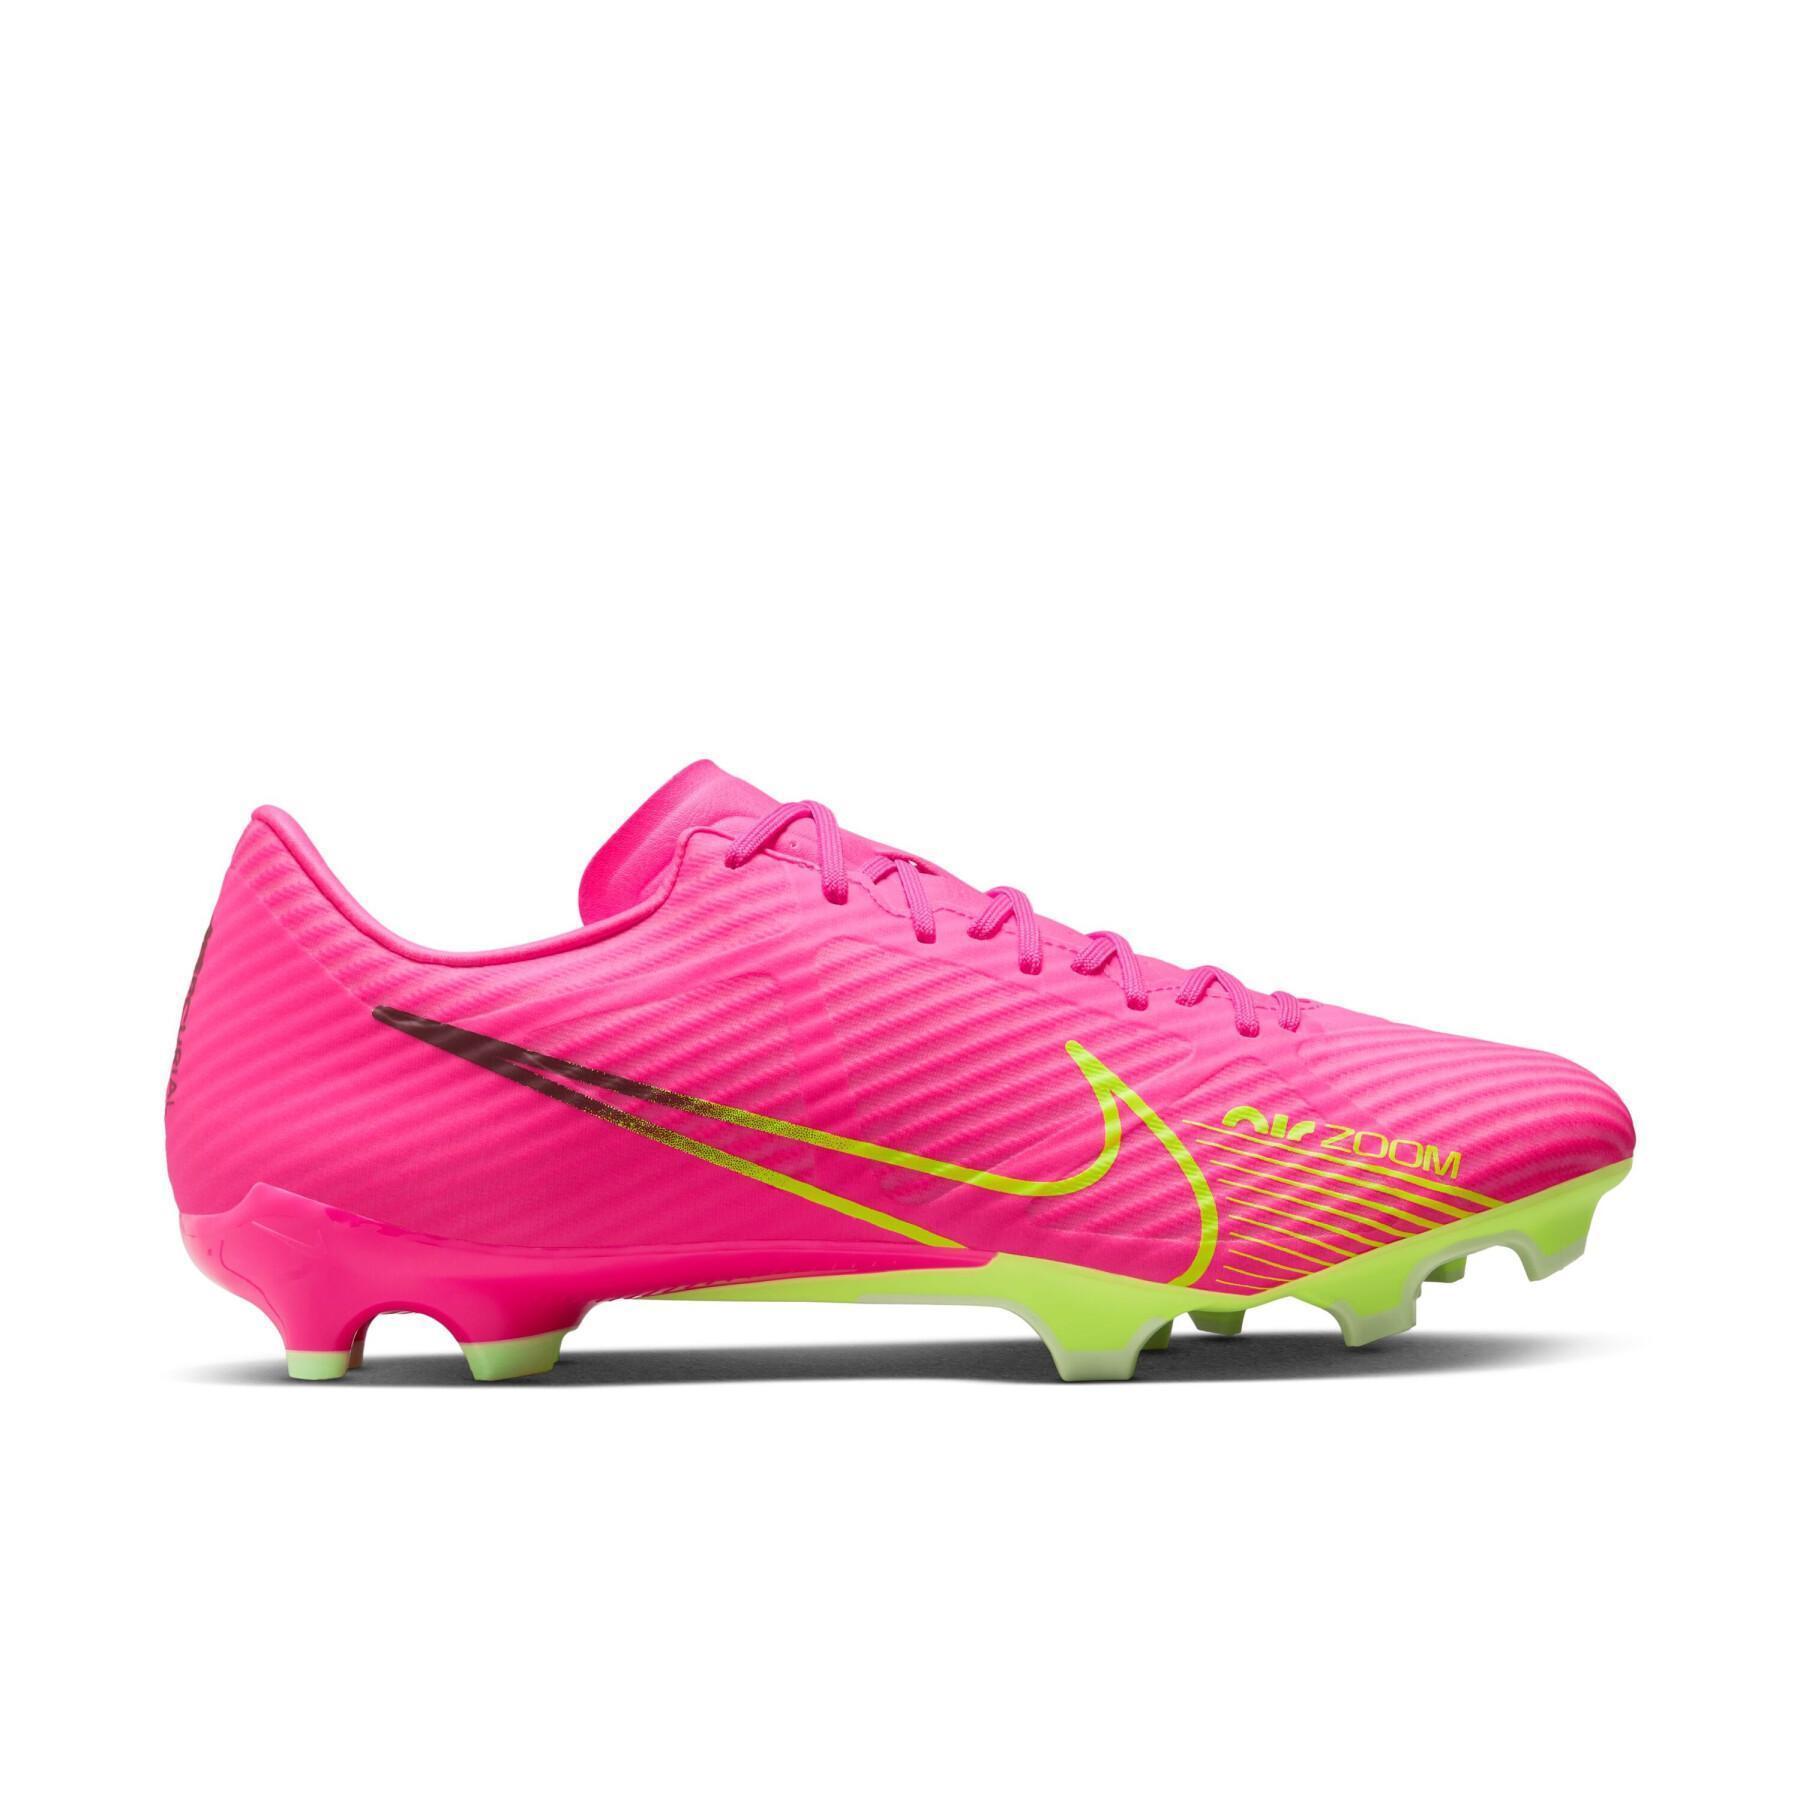 Soccer shoes Nike Zoom Mercurial Vapor 15 Academy MG - Luminious Pack